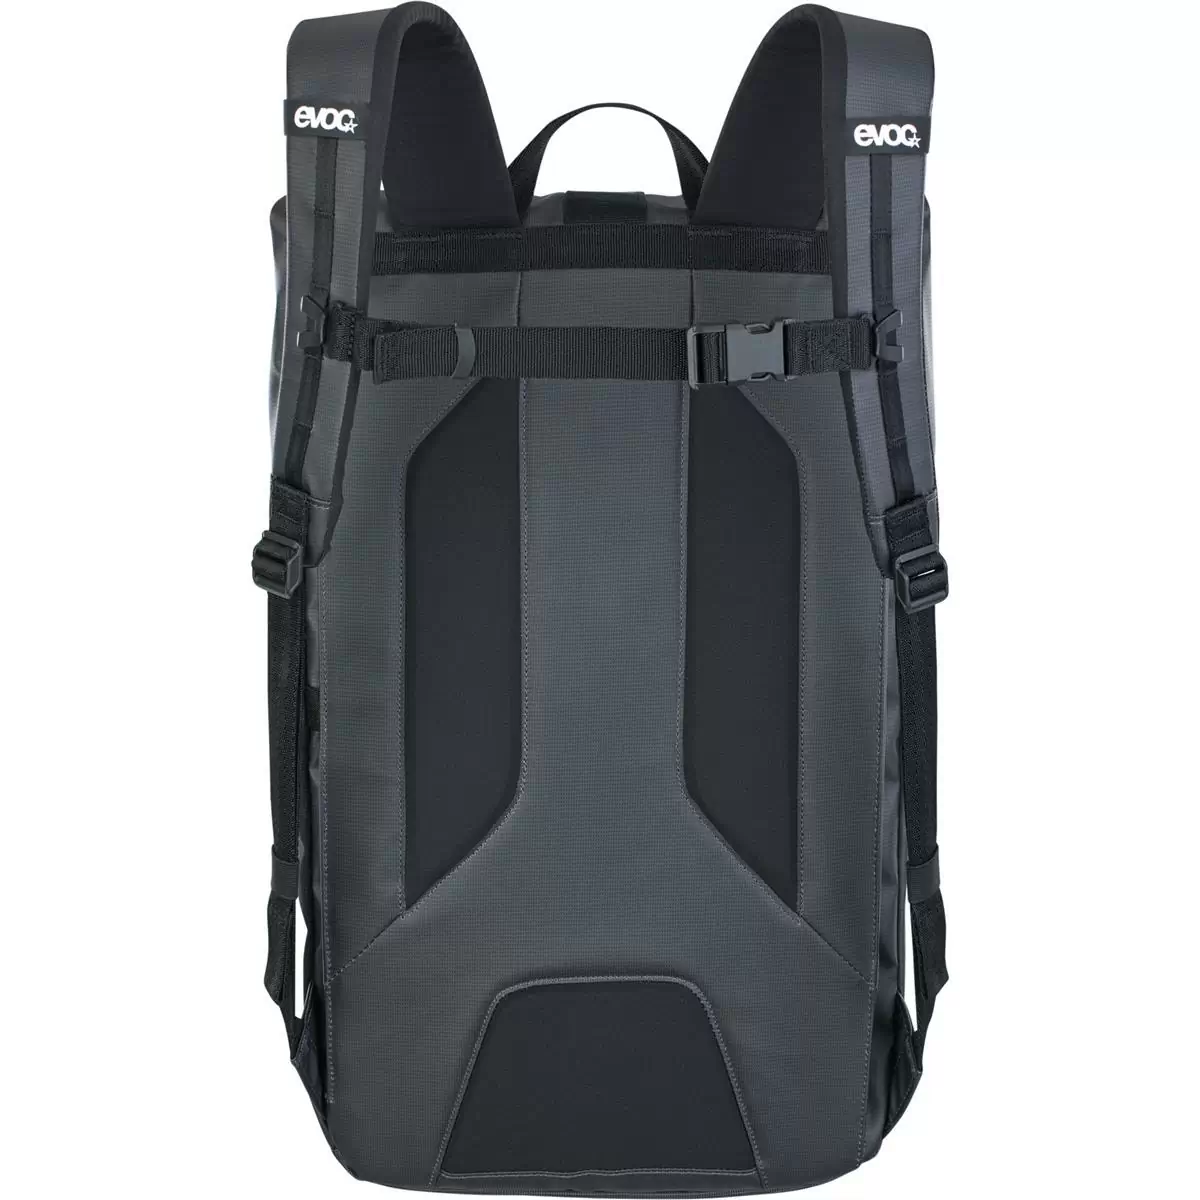 Duffle Backpack 26L Carbon Gray - Black #3